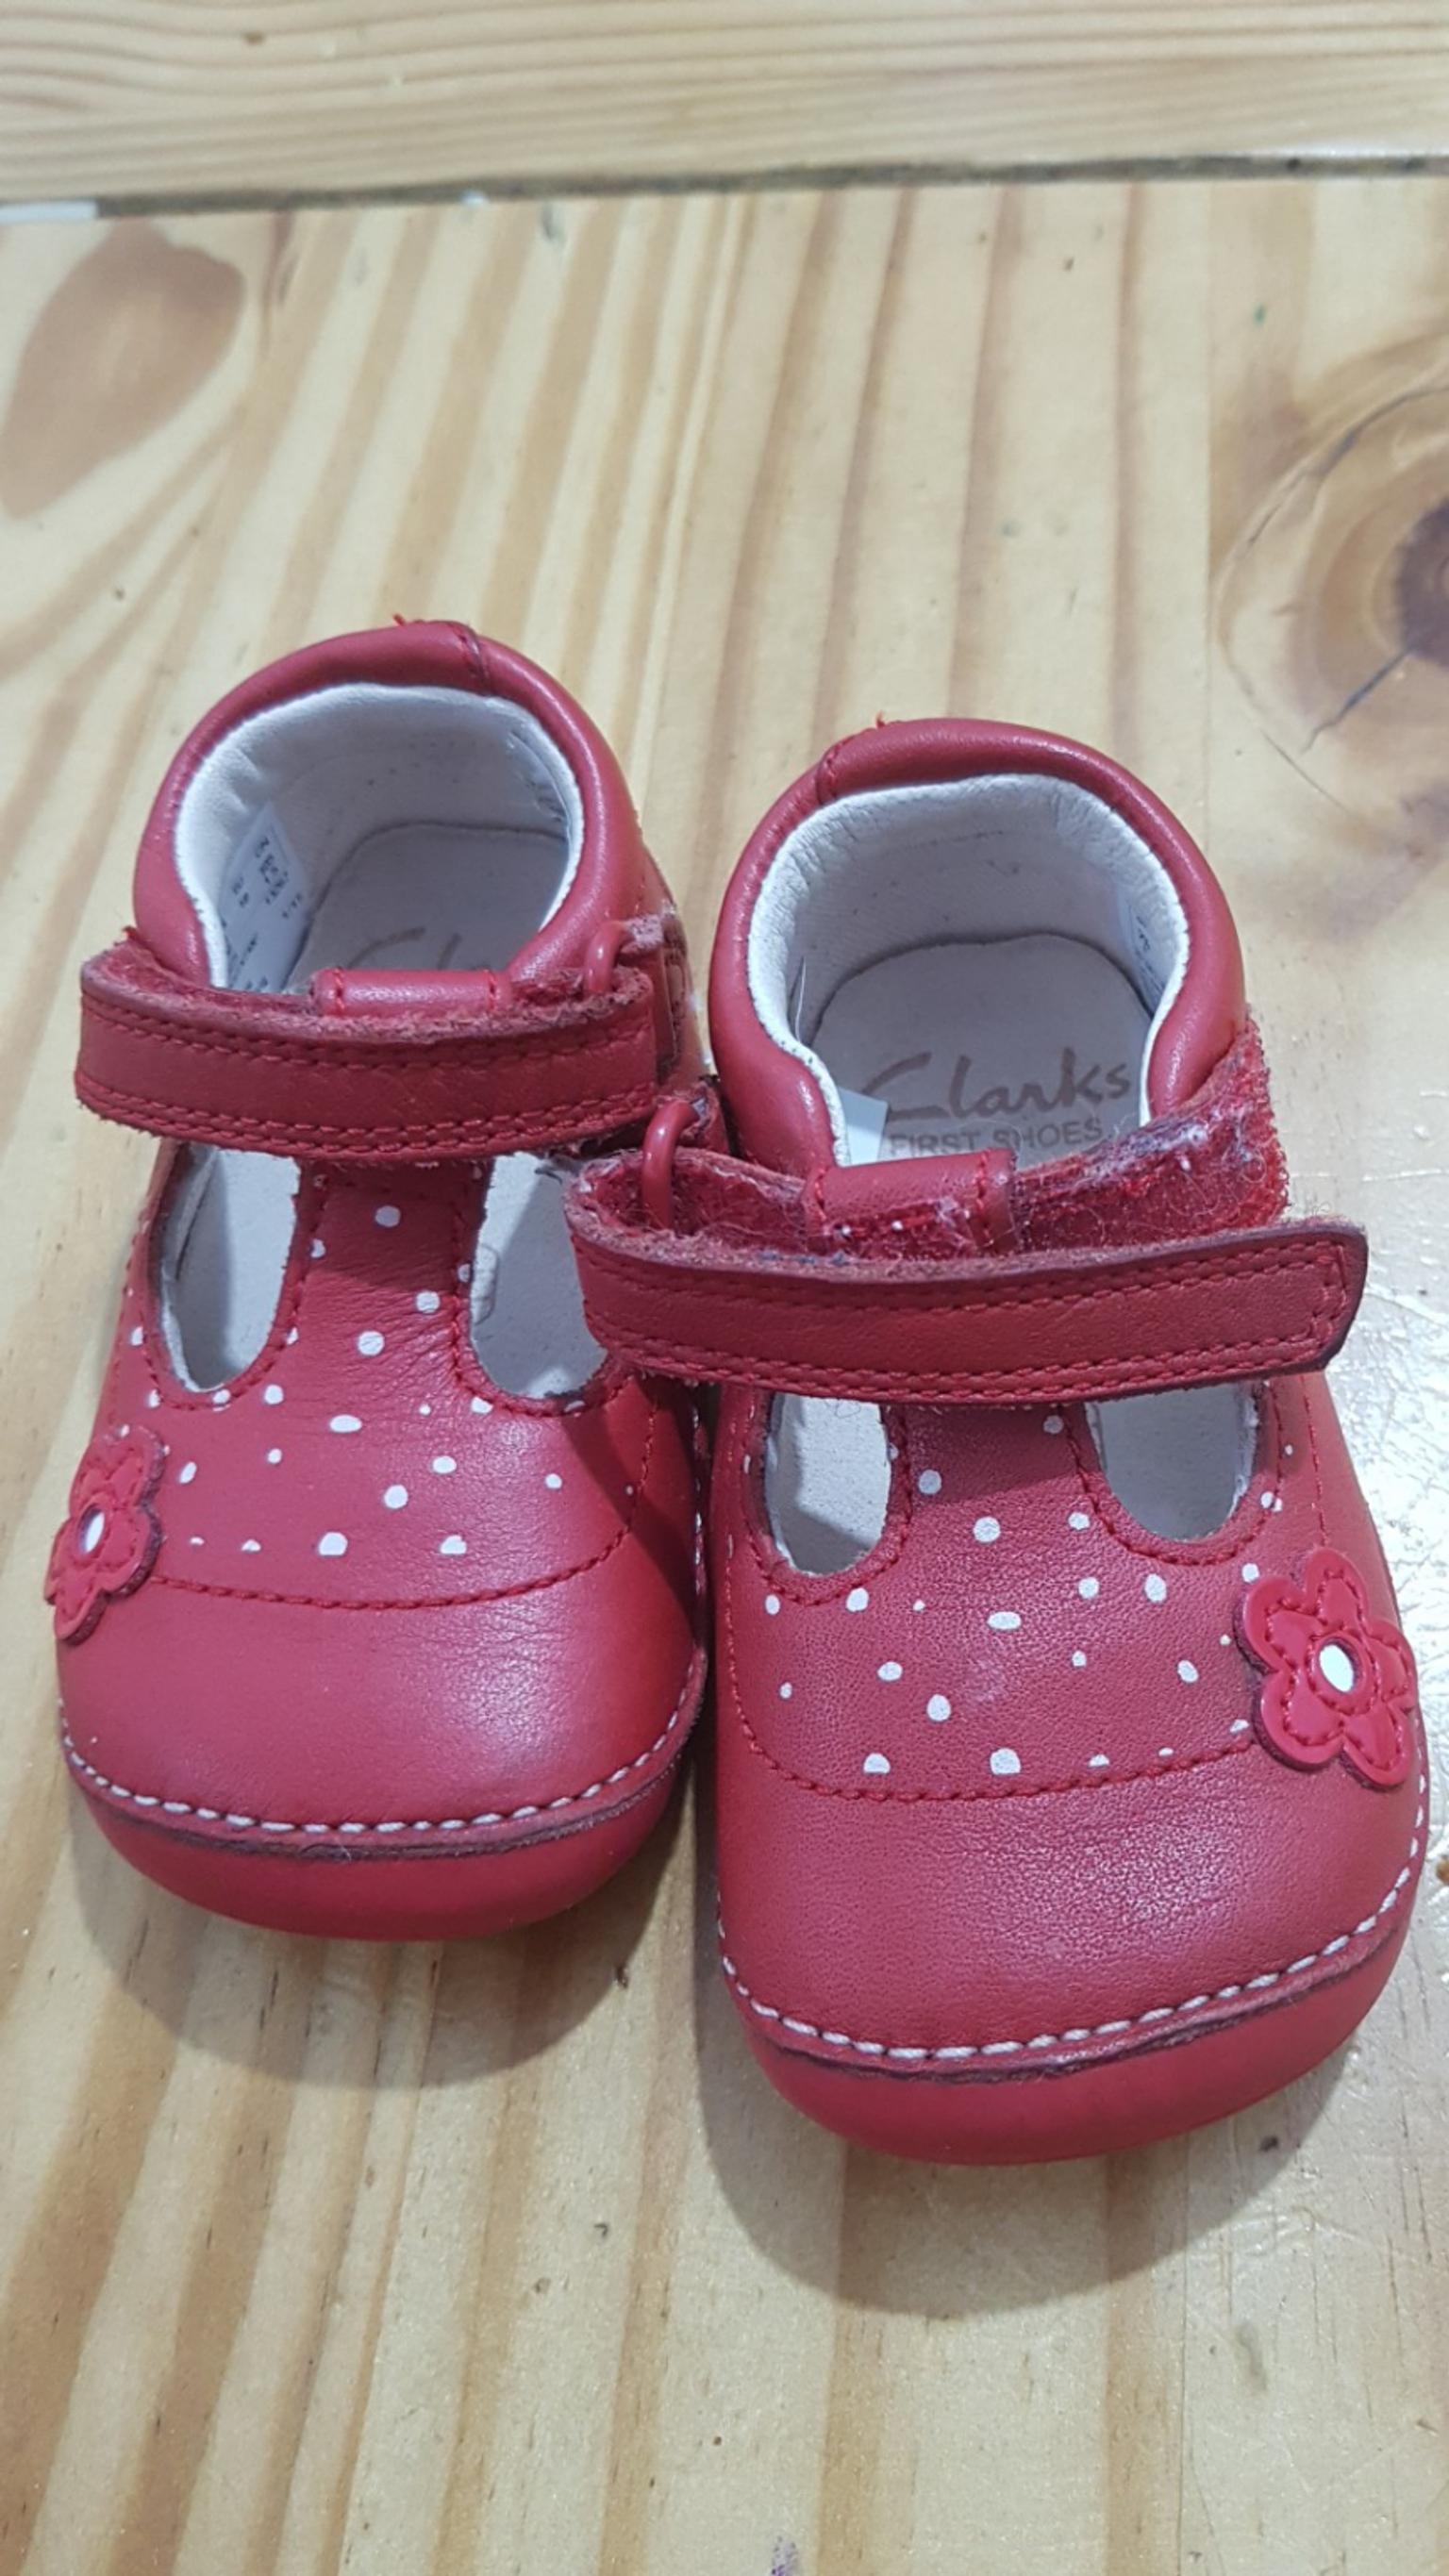 clarks size 2 baby shoes